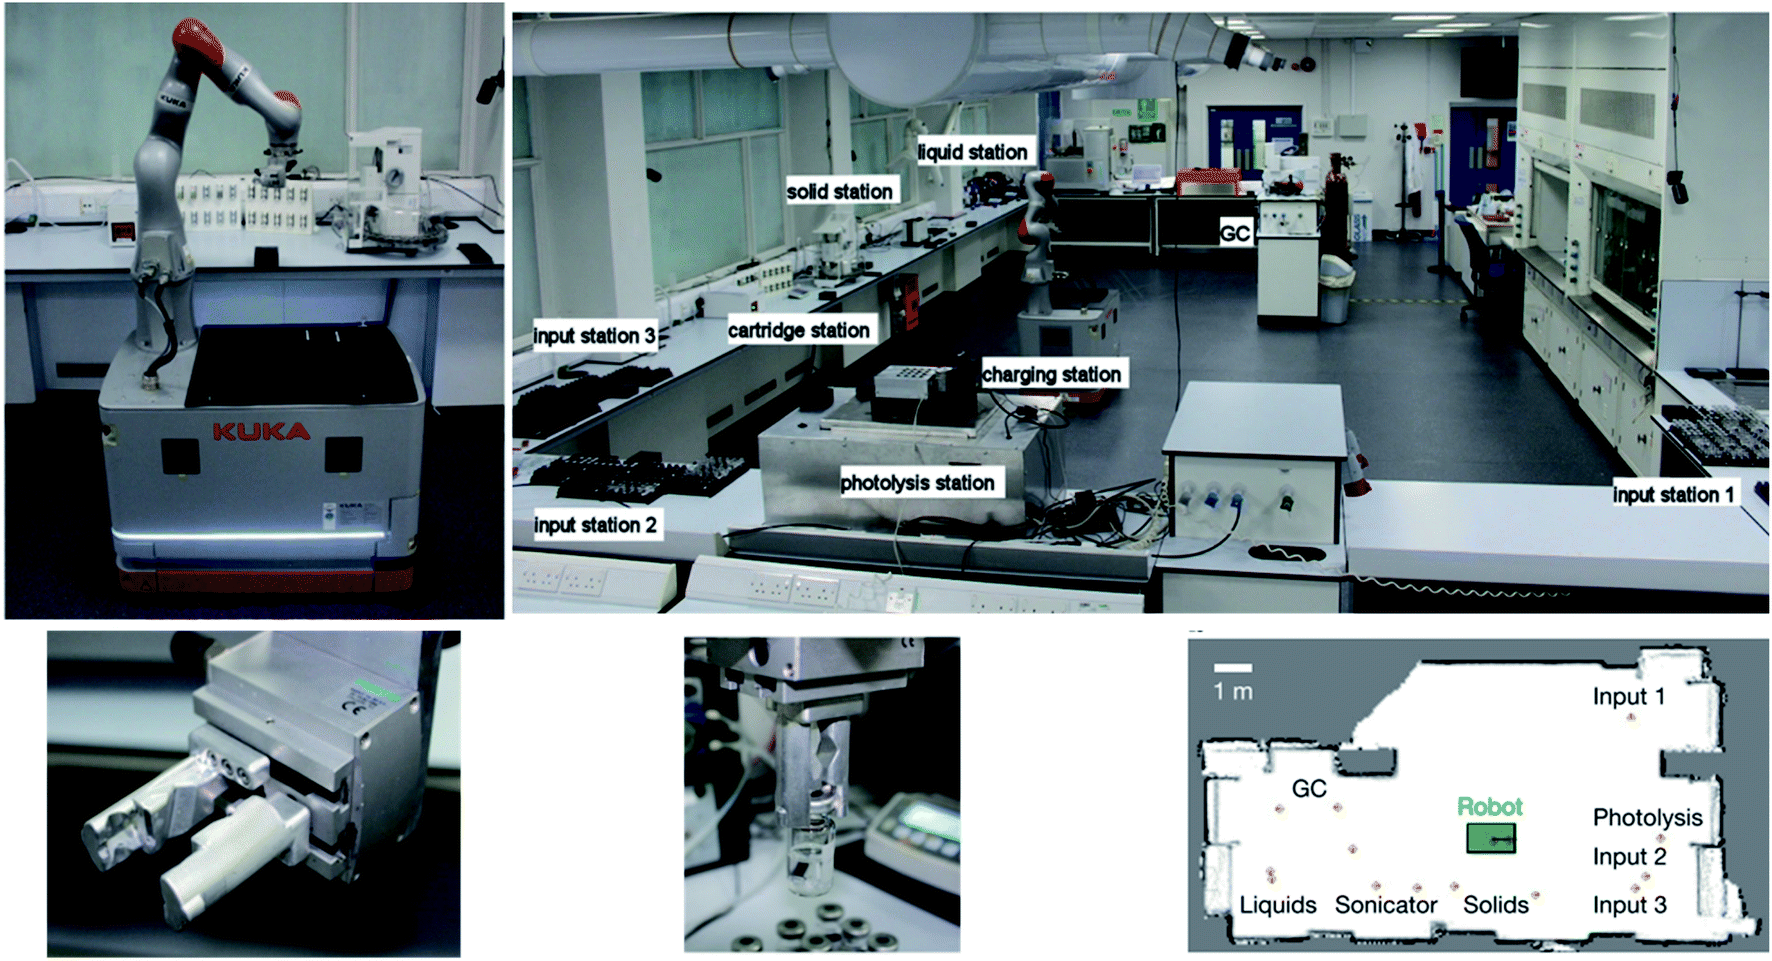 Digitising Chemical Synthesis In Automated And Robotic Flow Chemical Science Rsc Publishing Doi 10 1039 D0sca